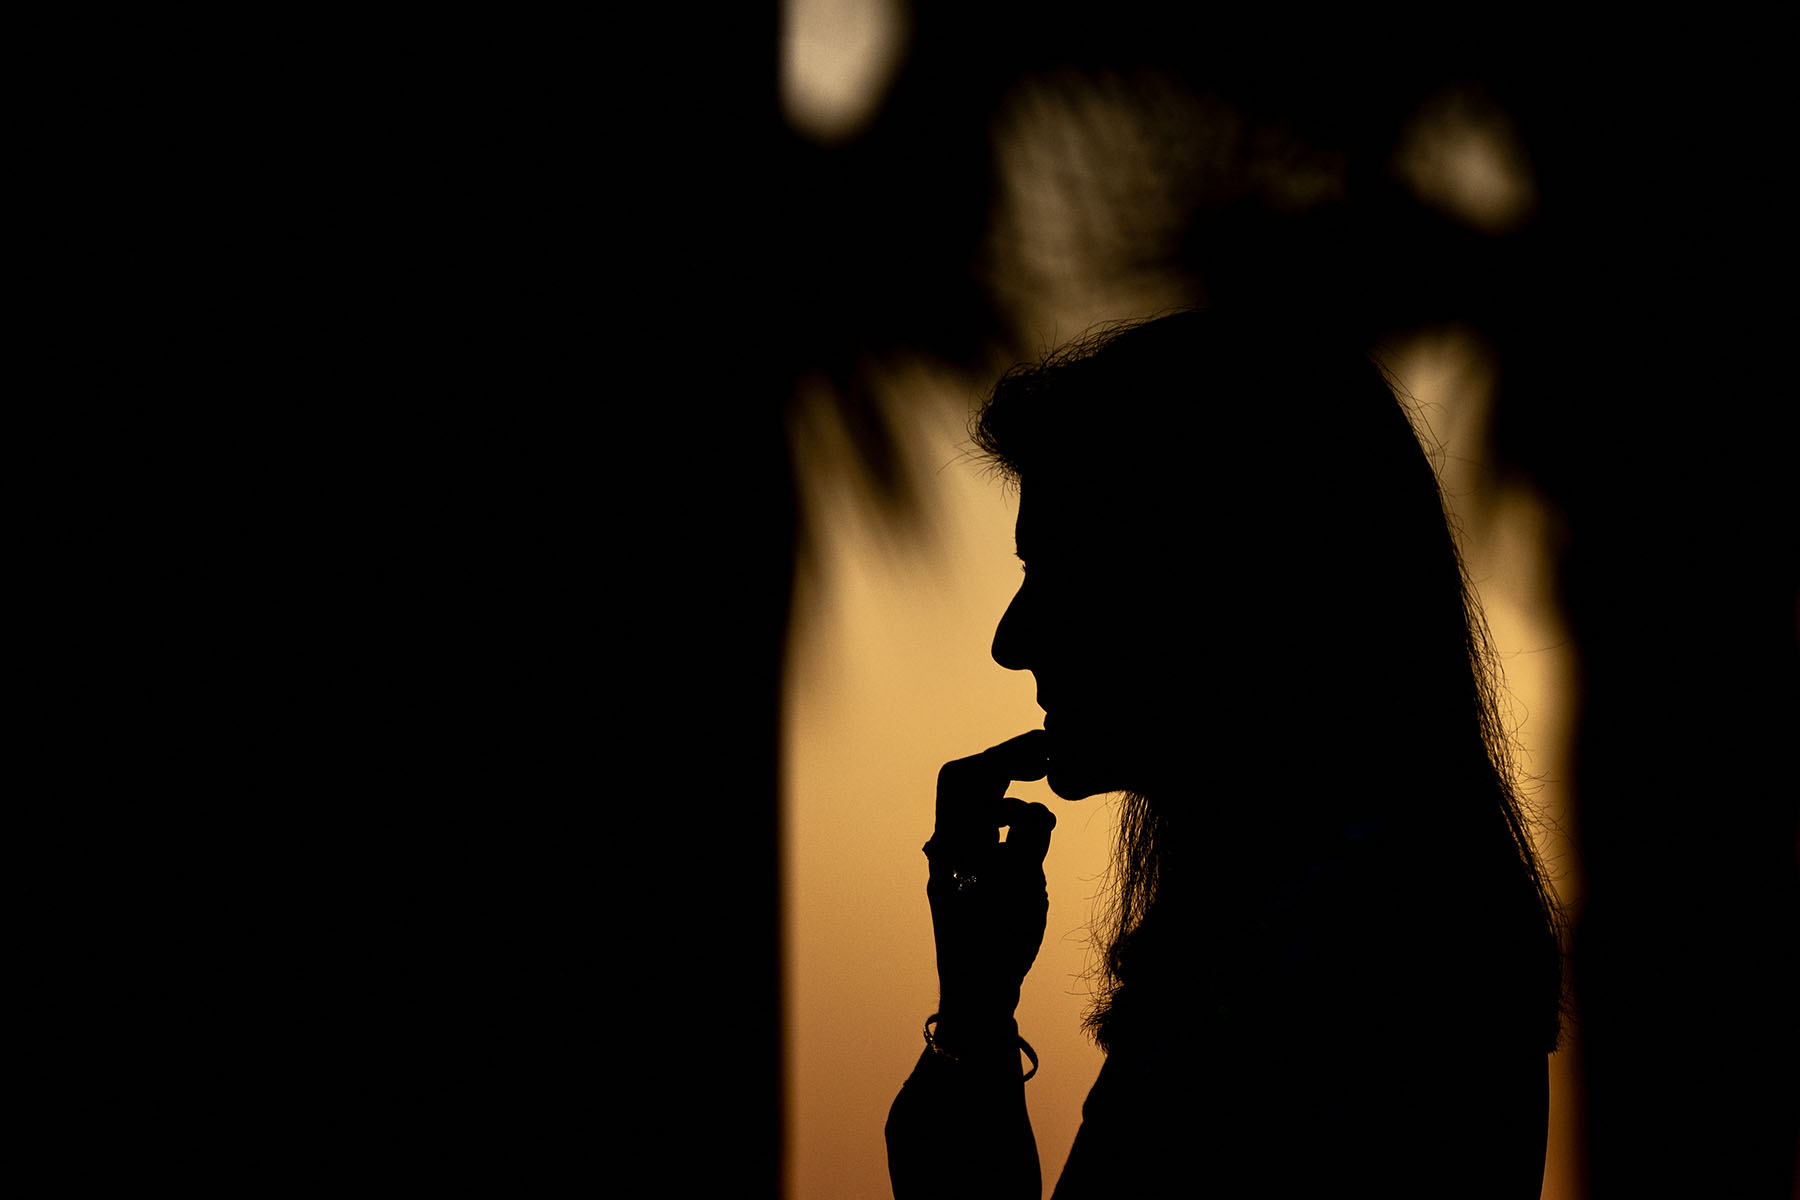 Nikki Haley's silhouette is seen at sunset at a campaign event in Beaufort, South Carolina.